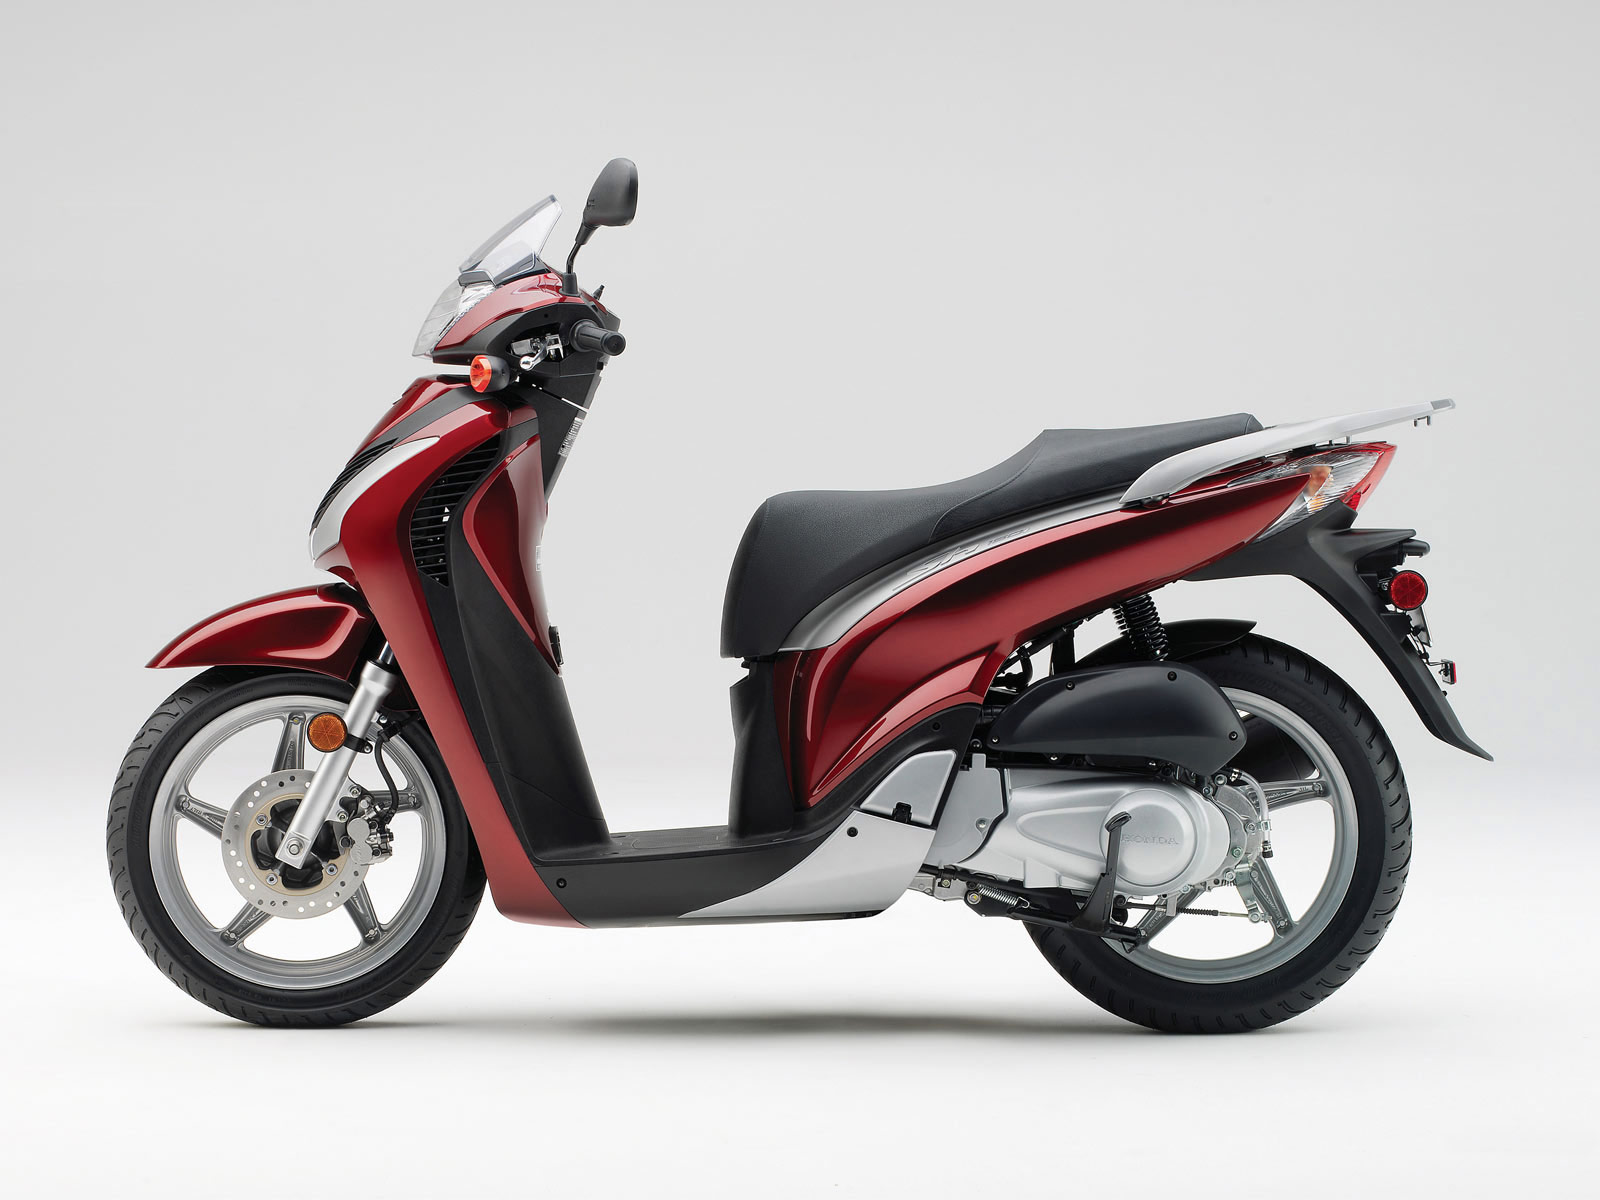 2010 HONDA SH-150i scooter wallpapers, specifications